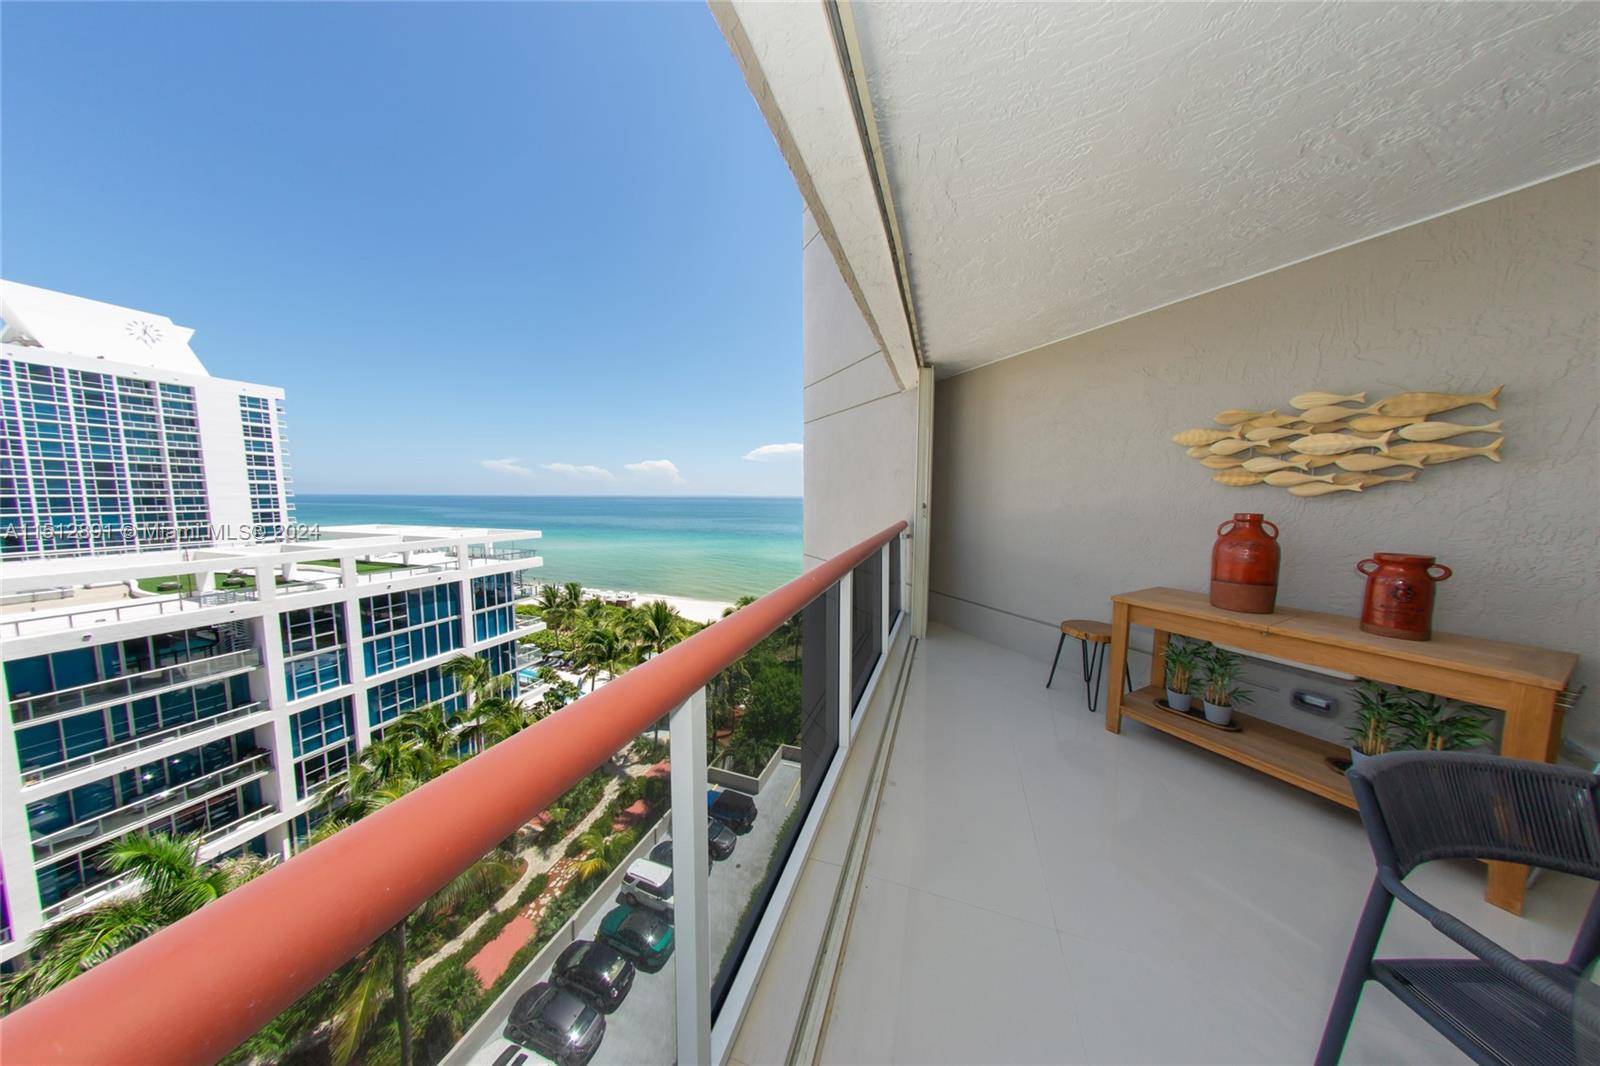 This fully furnished, turnkey residence offers a one of a kind living with stunning Miami Beach views.